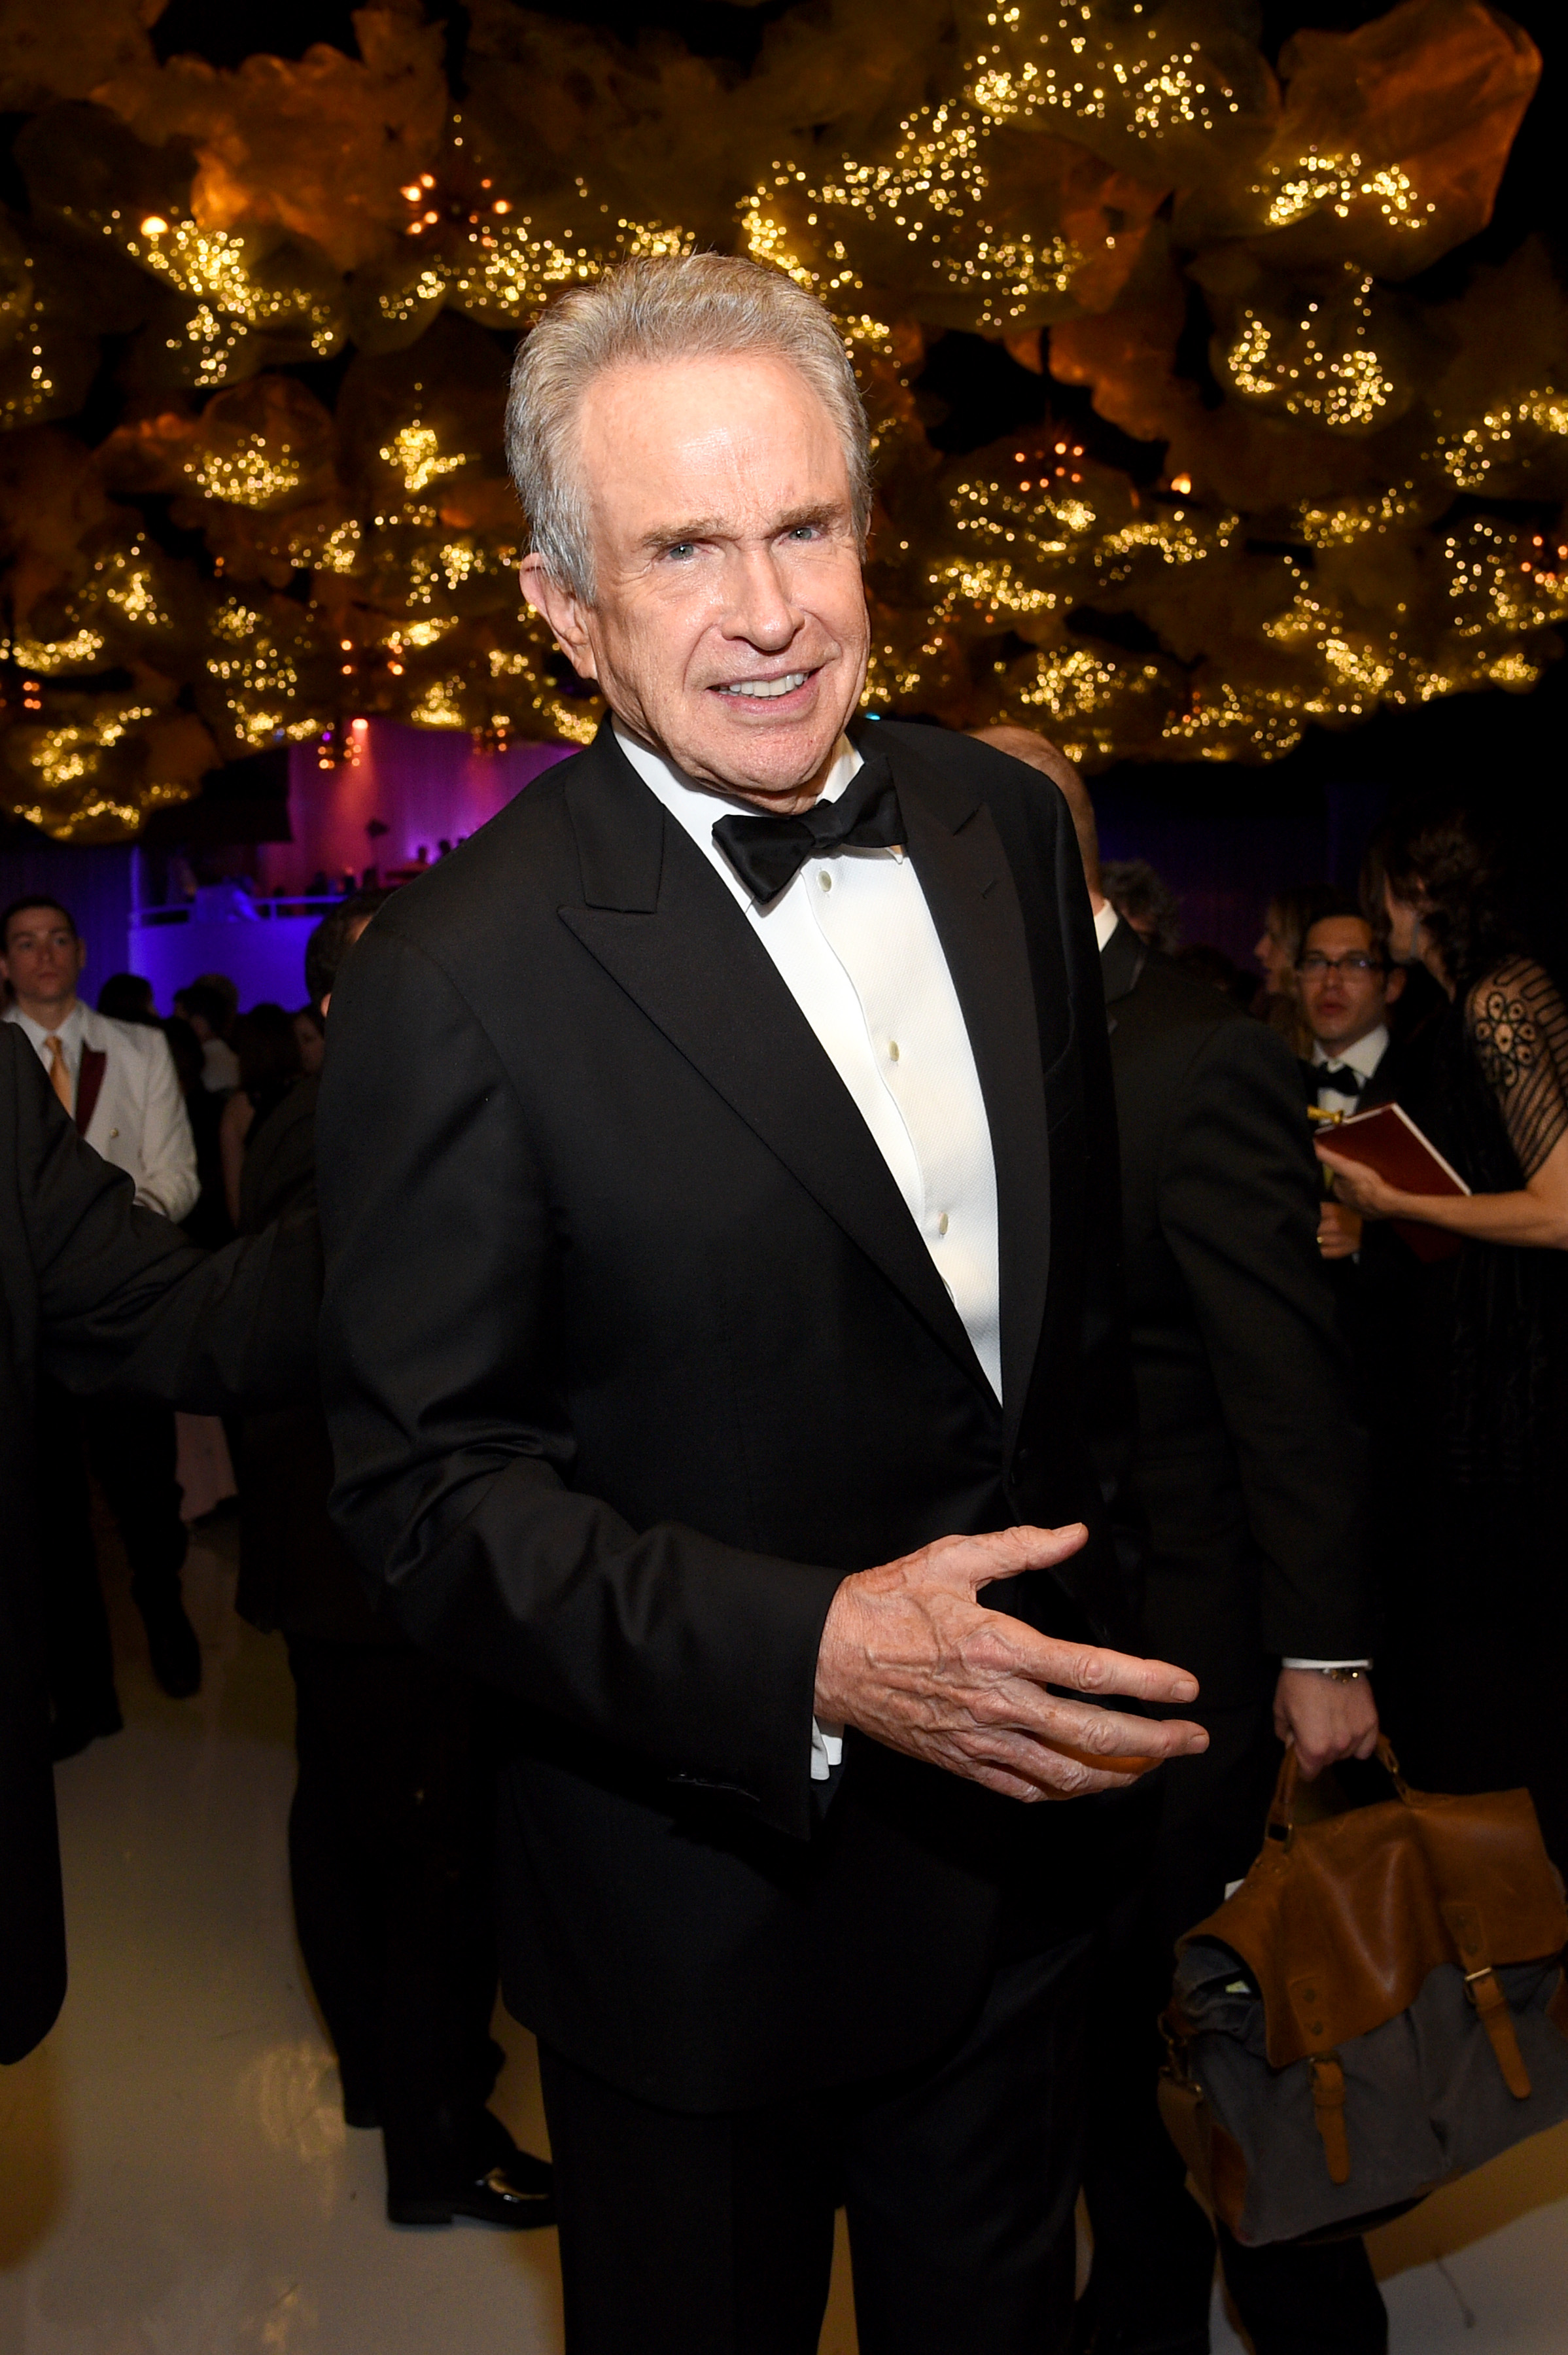 Warren Beatty attends the 89th Annual Academy Awards Governors Ball in Hollywood, California, on February 26, 2017. | Source: Getty Images